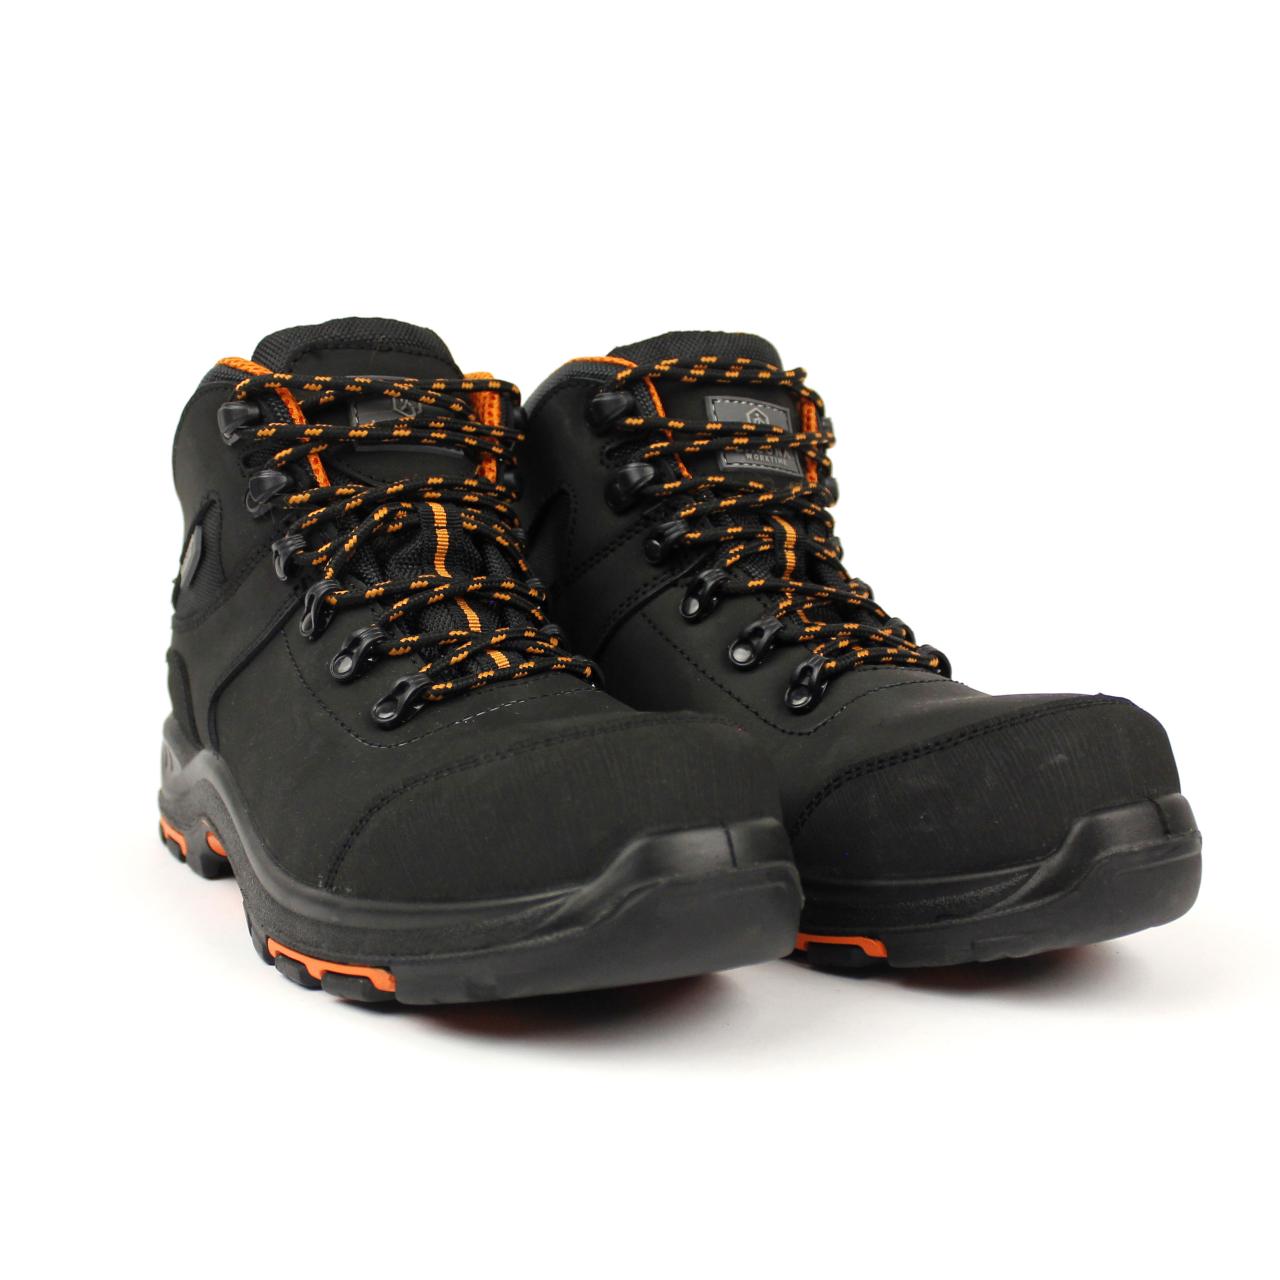 BERG S3 high top safety shoe - Pharsol Protect - Workwear